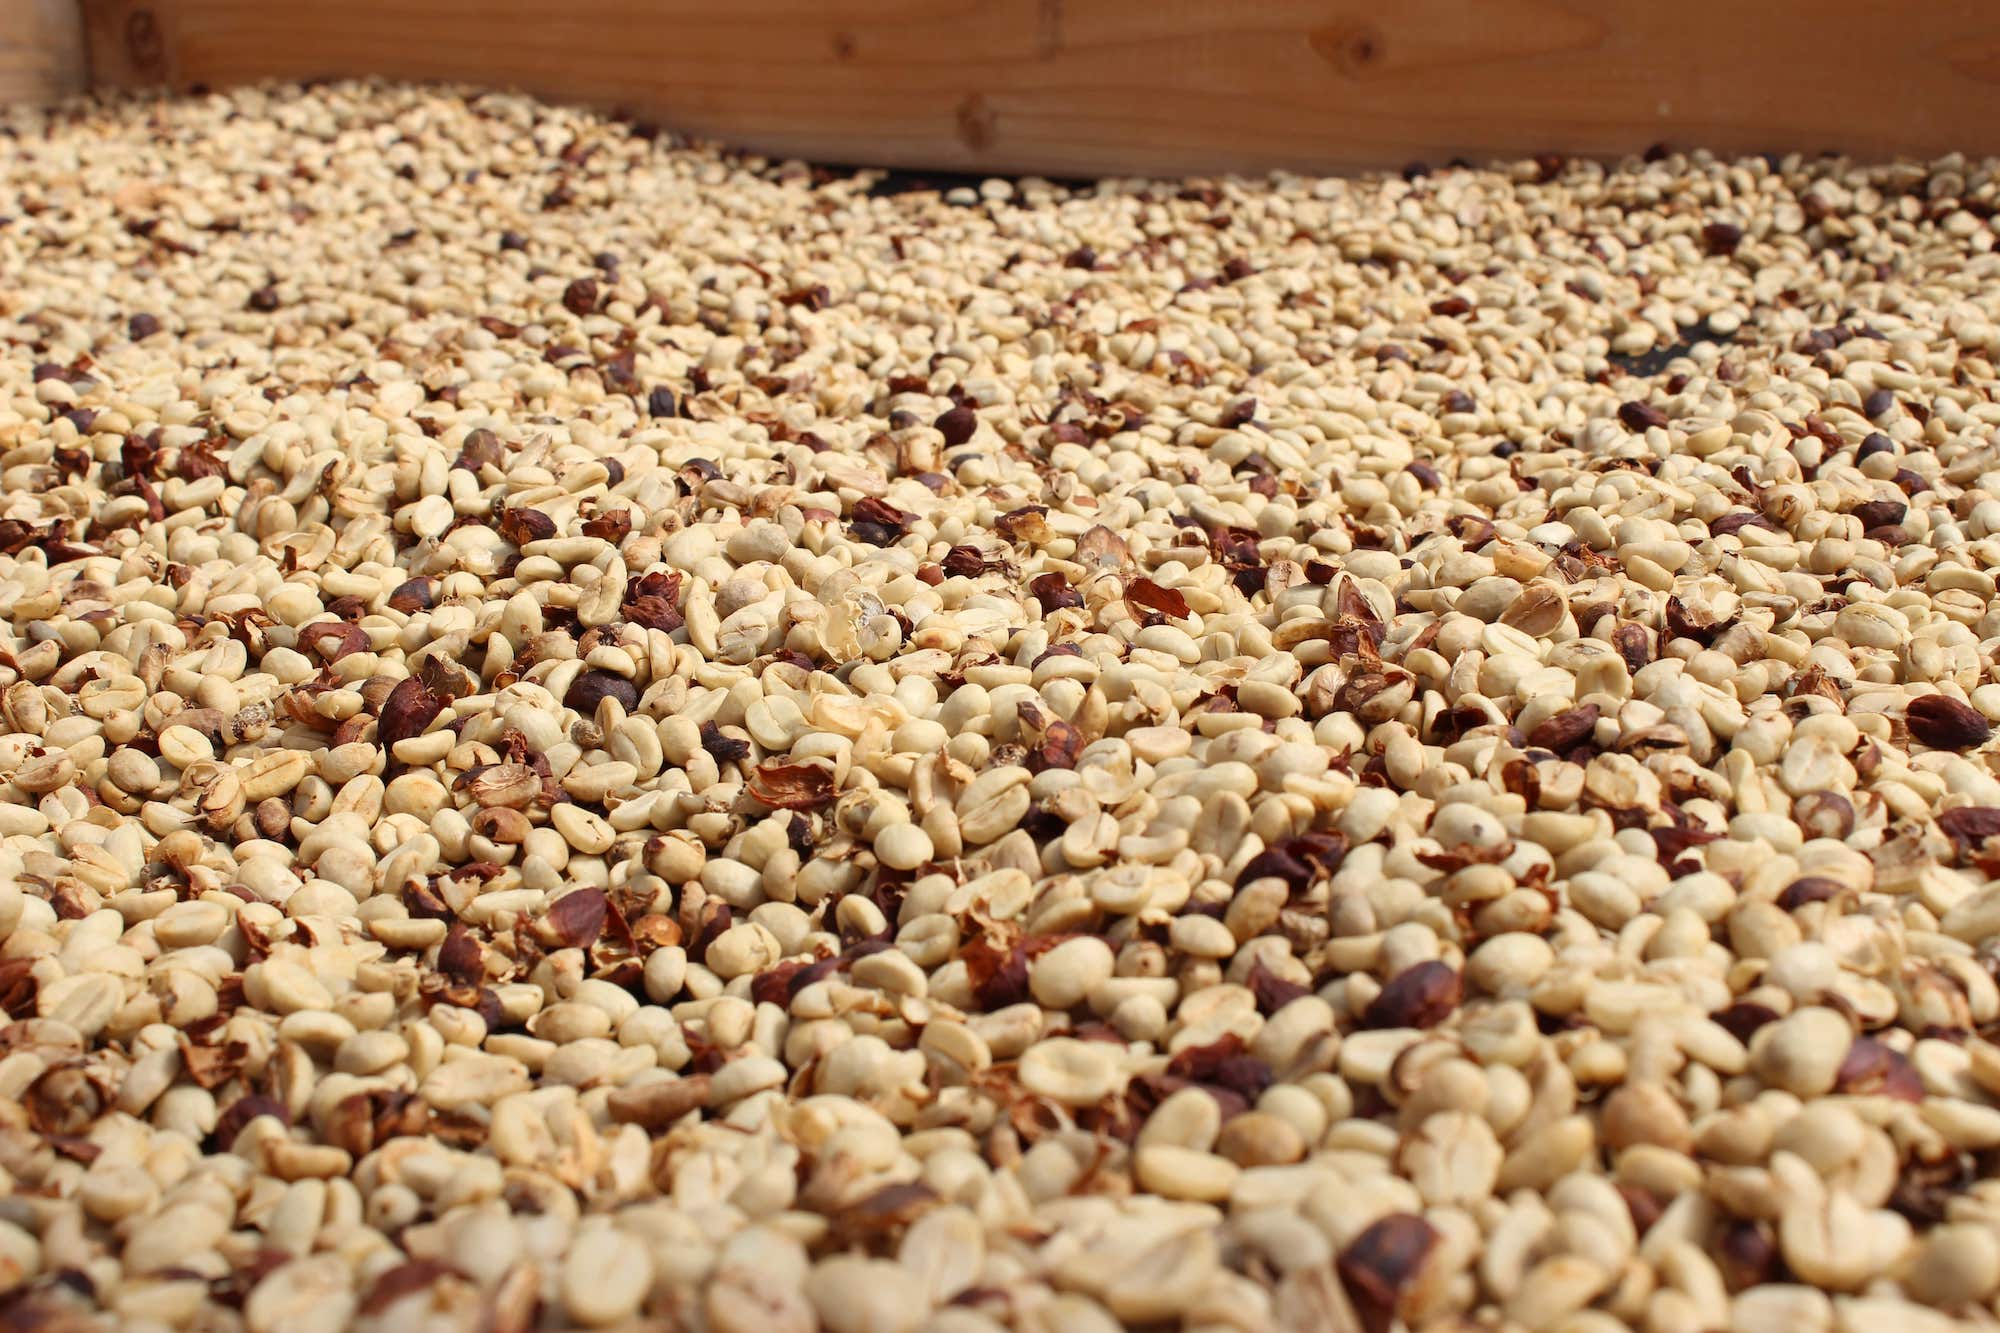 Processing green coffee before milling and roasting